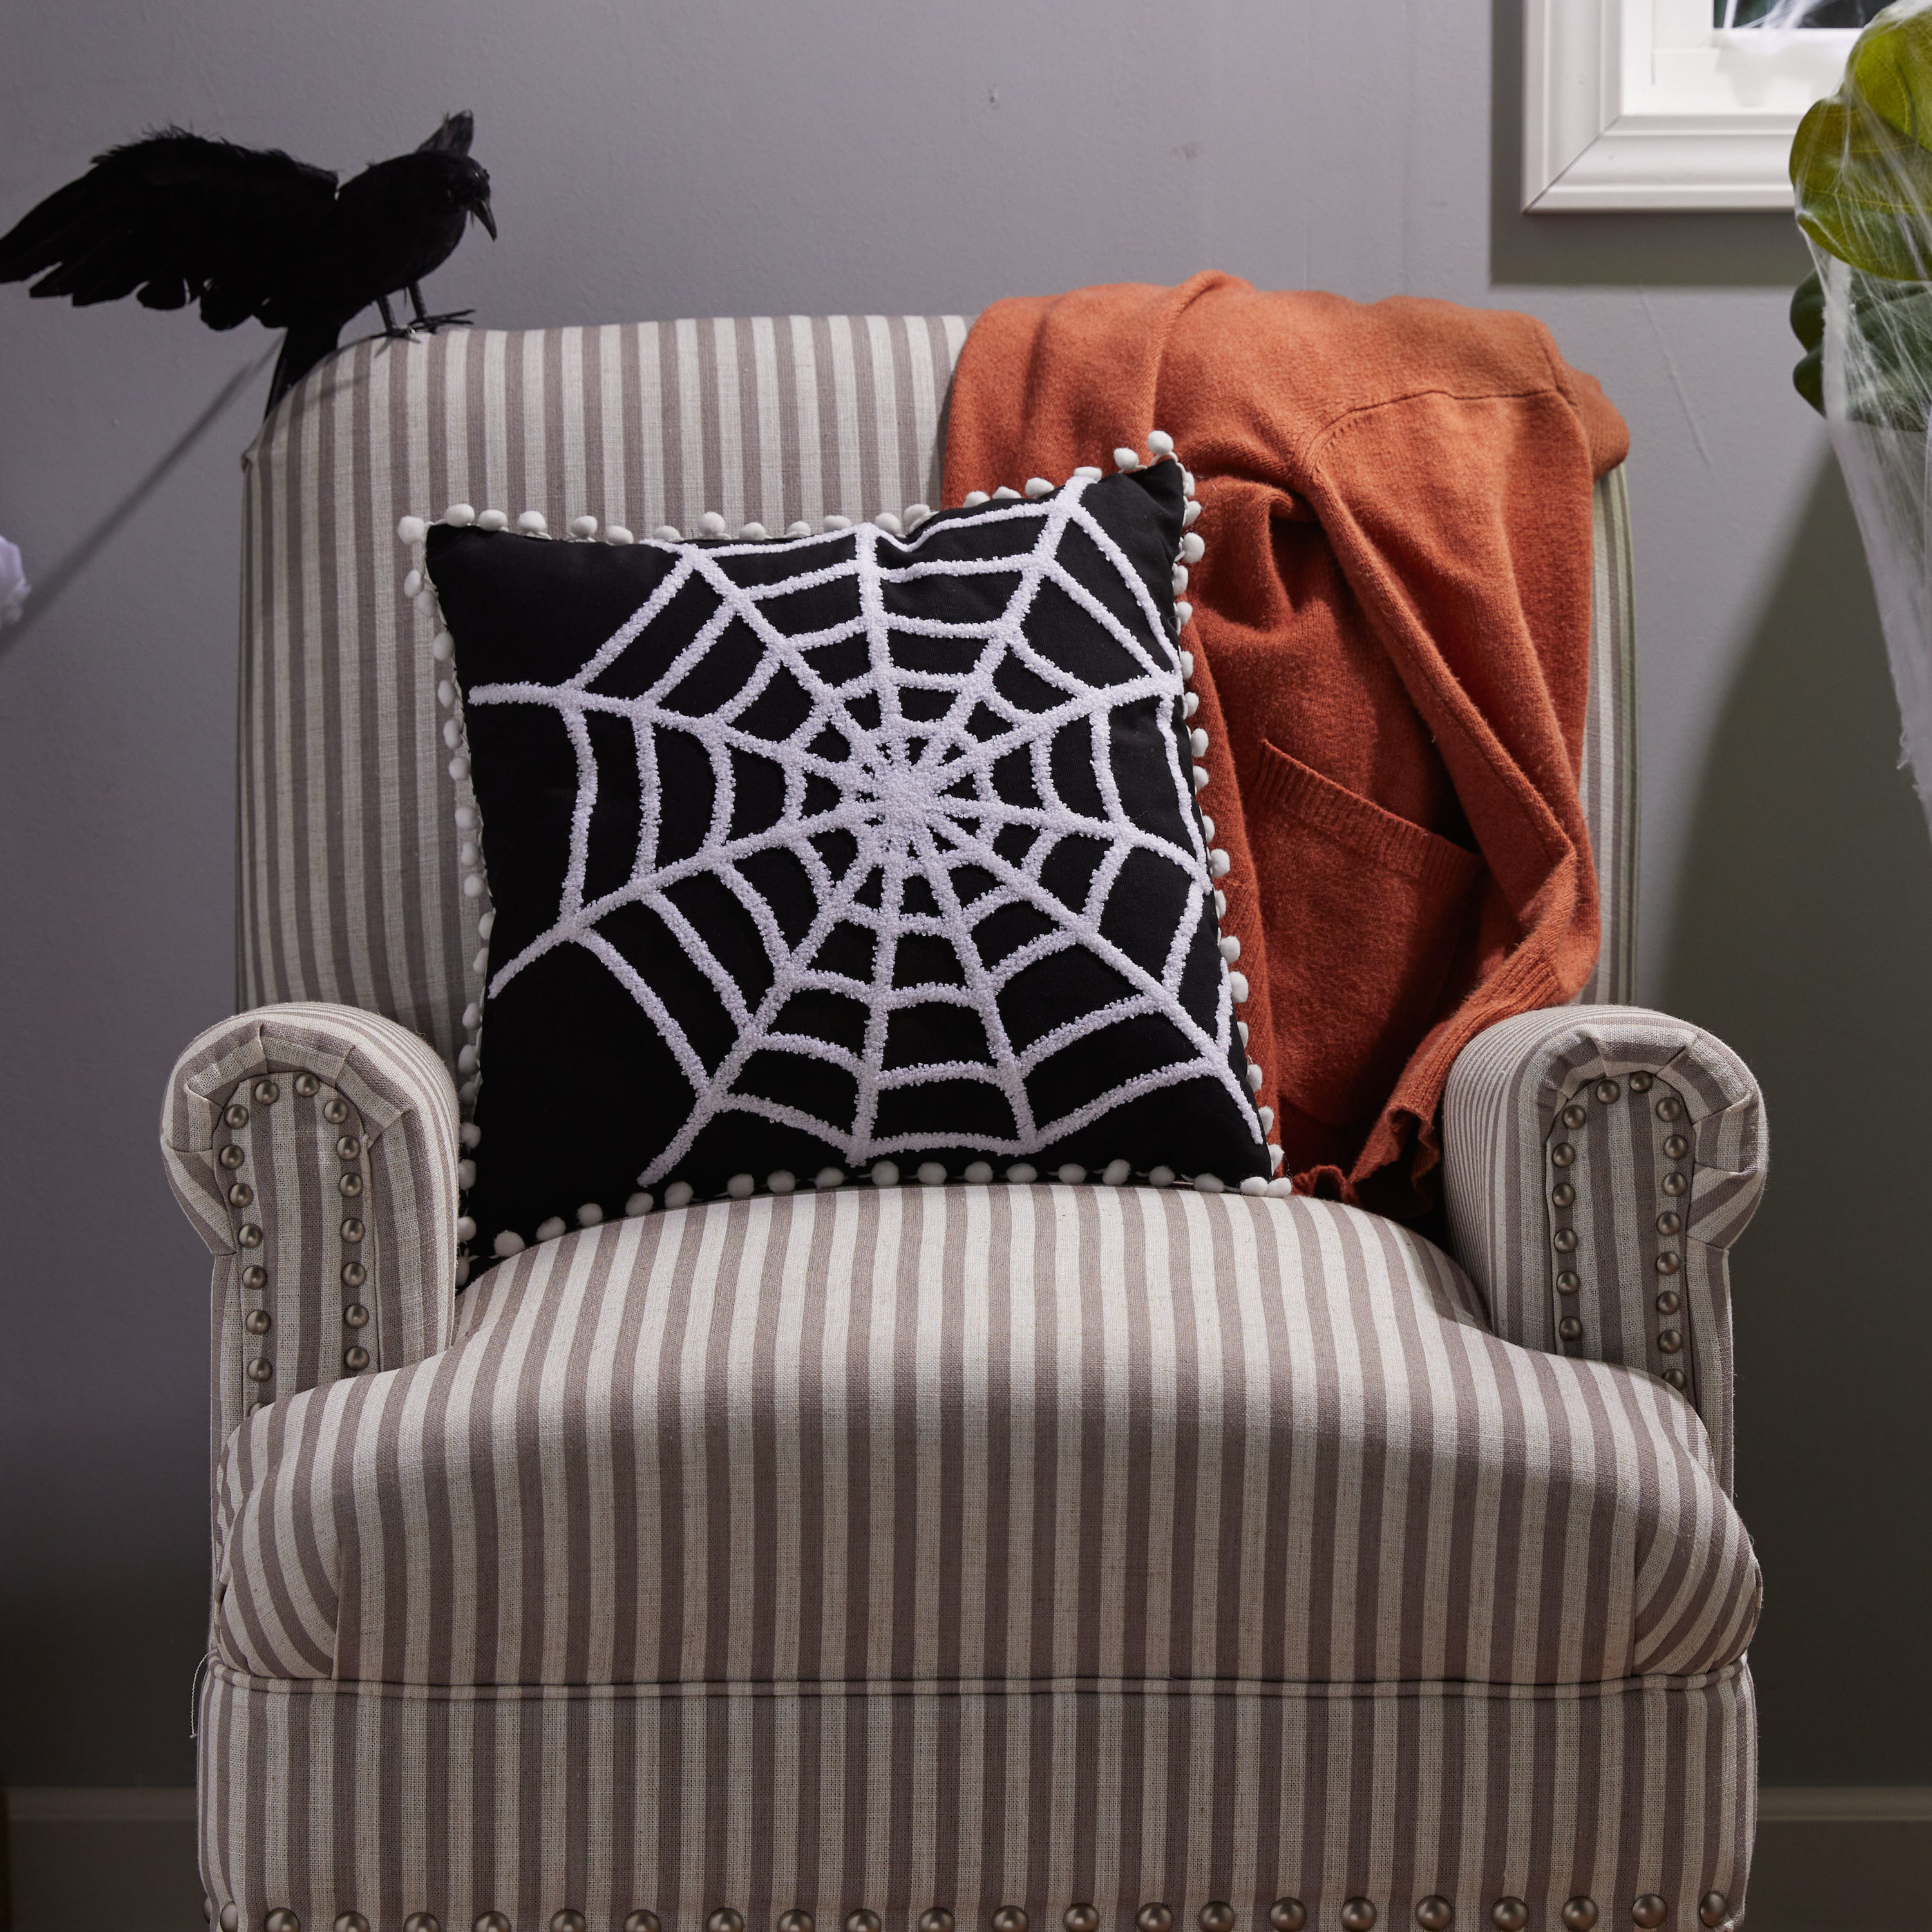 Hand Tufted Halloween Pillow Cover,ghosts Embroidered Cushion Cover,fall  Holiday Home Decor Rug,spider Web Spooky Season Gifts,16x16 Pillow 